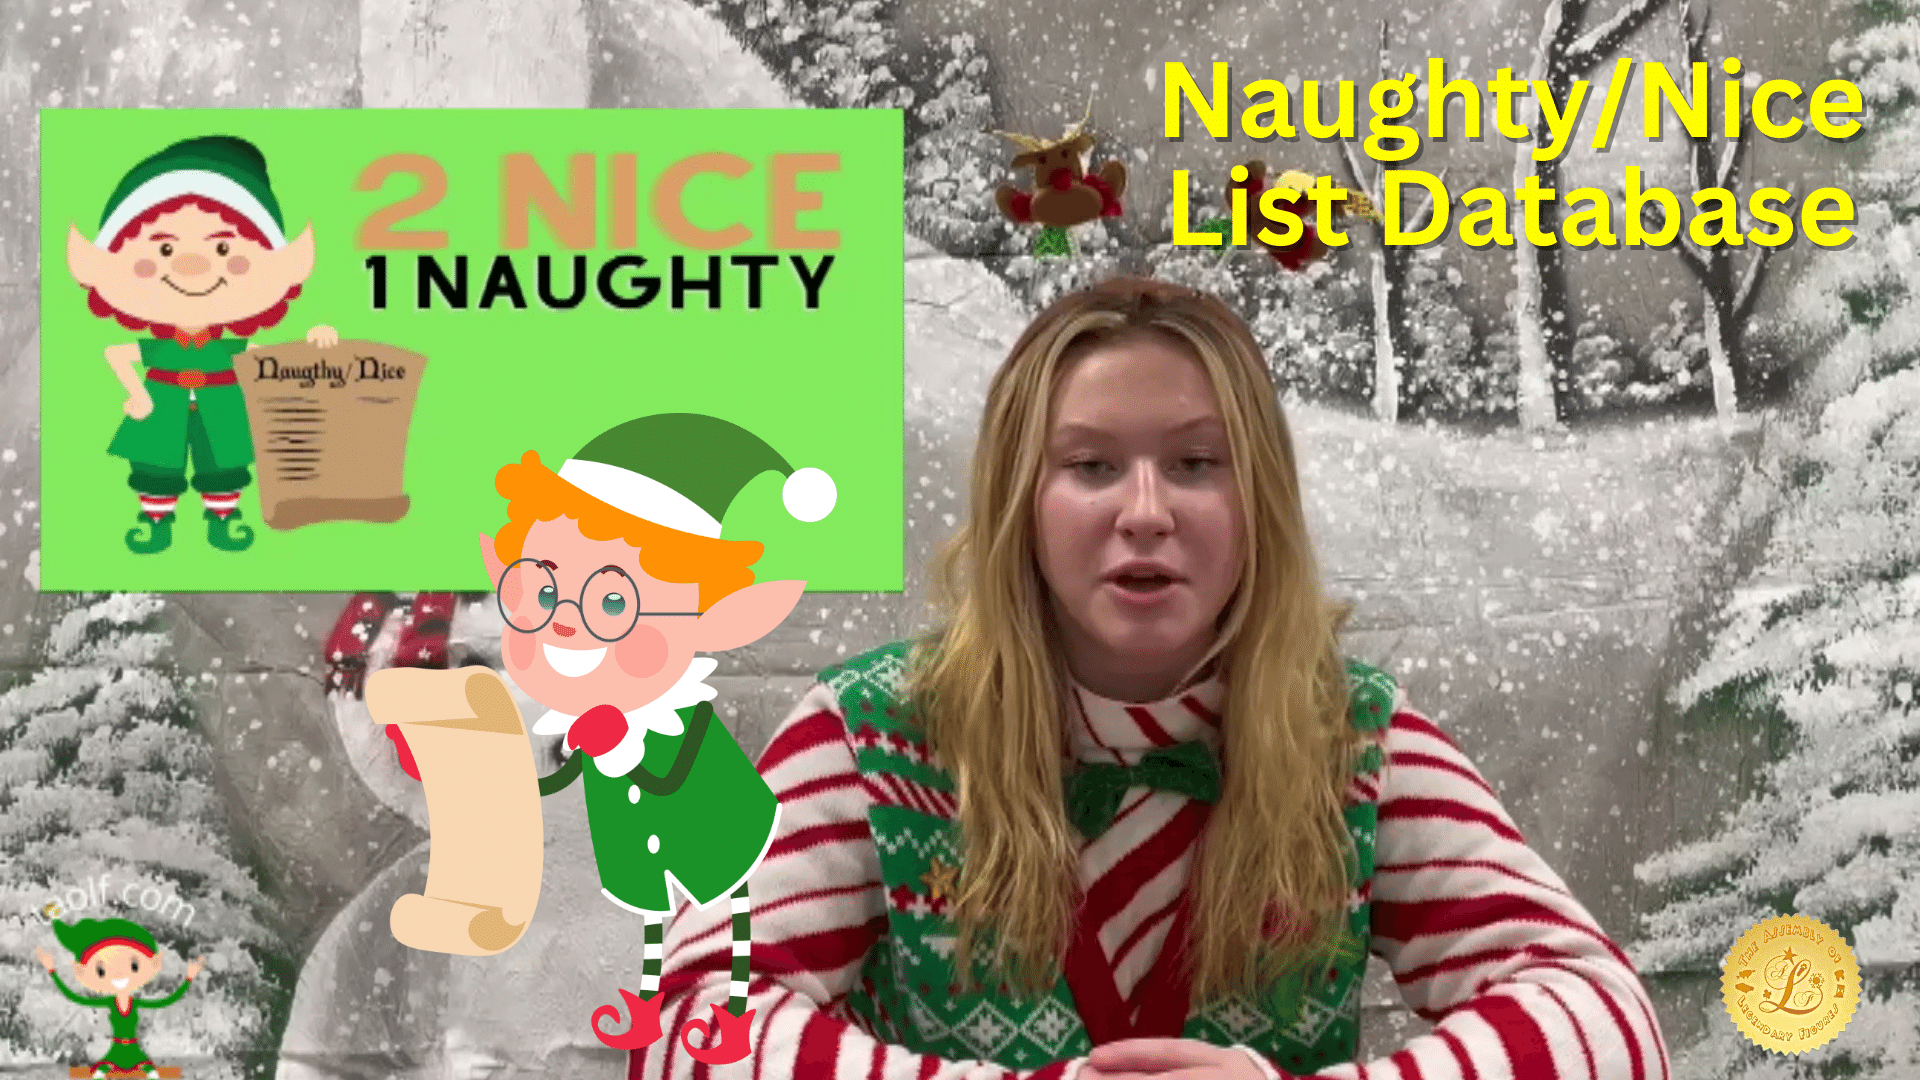 Details about the Naughty Nice List